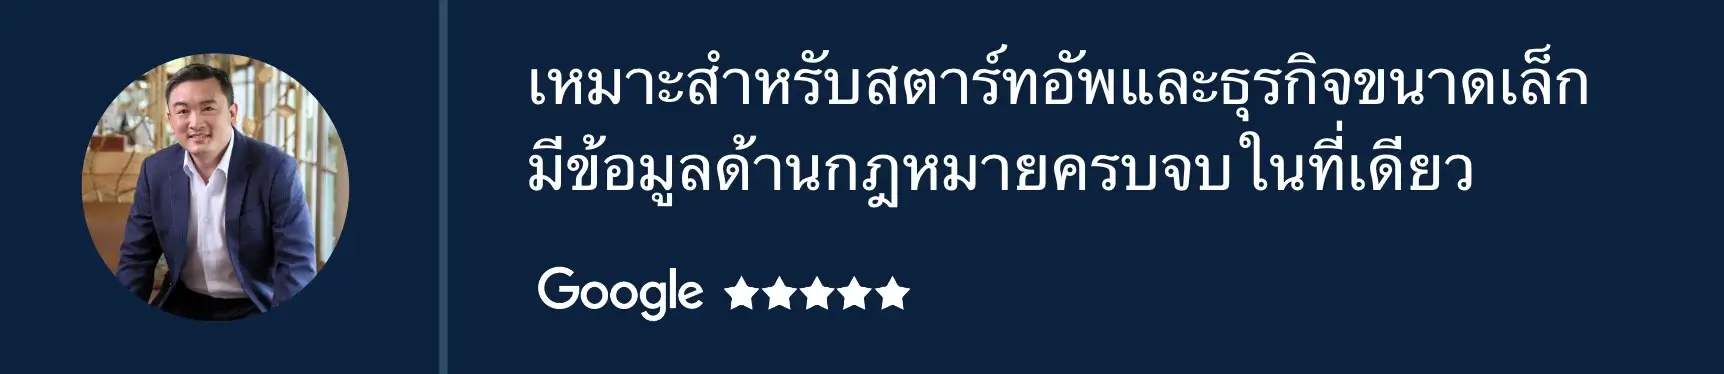 Thailand review 7